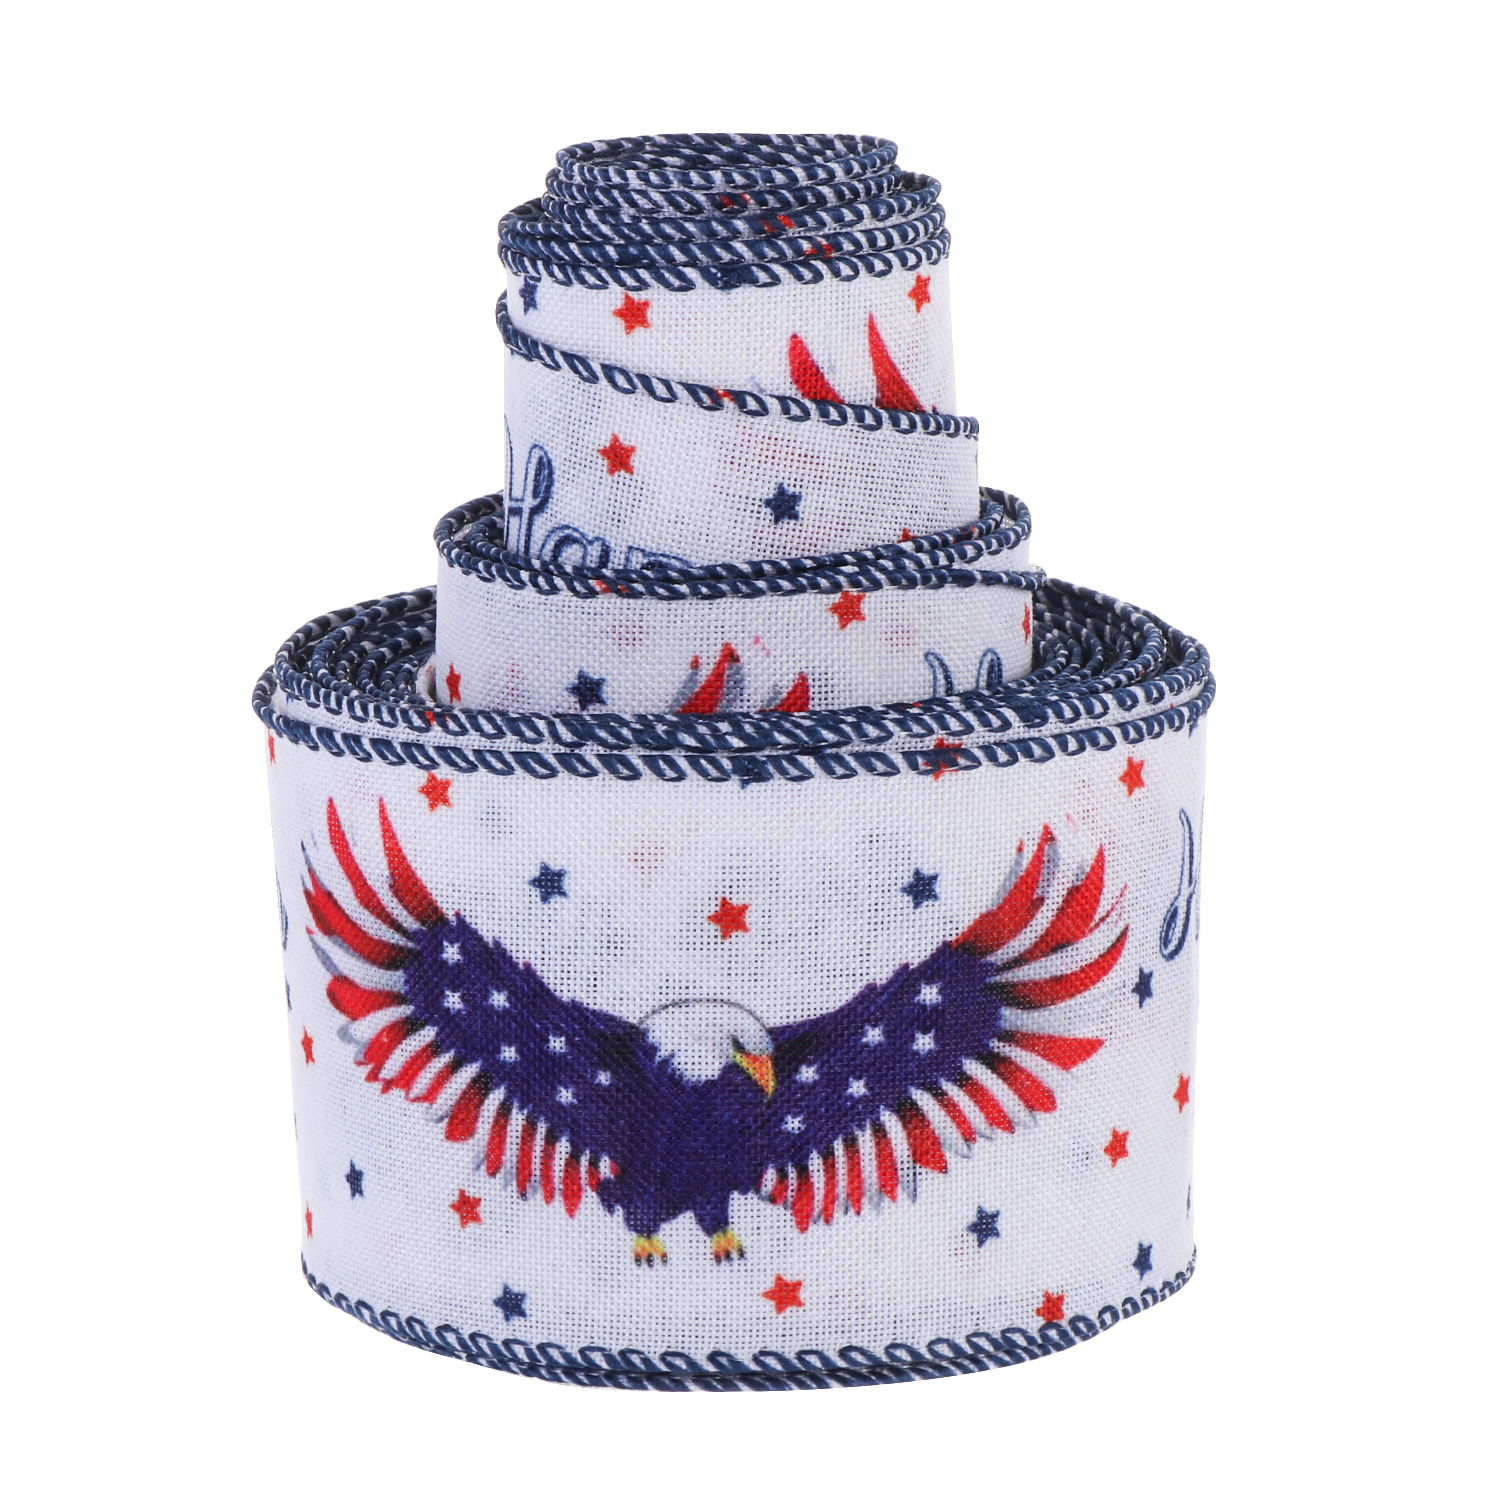 NEONY Party Supplies Color Ribbon Eagle Cake wrapping Ribbon Independence Day Card Decor New Gift Wrapping July 4 Red Blue White Bows DIY Holiday Decoration